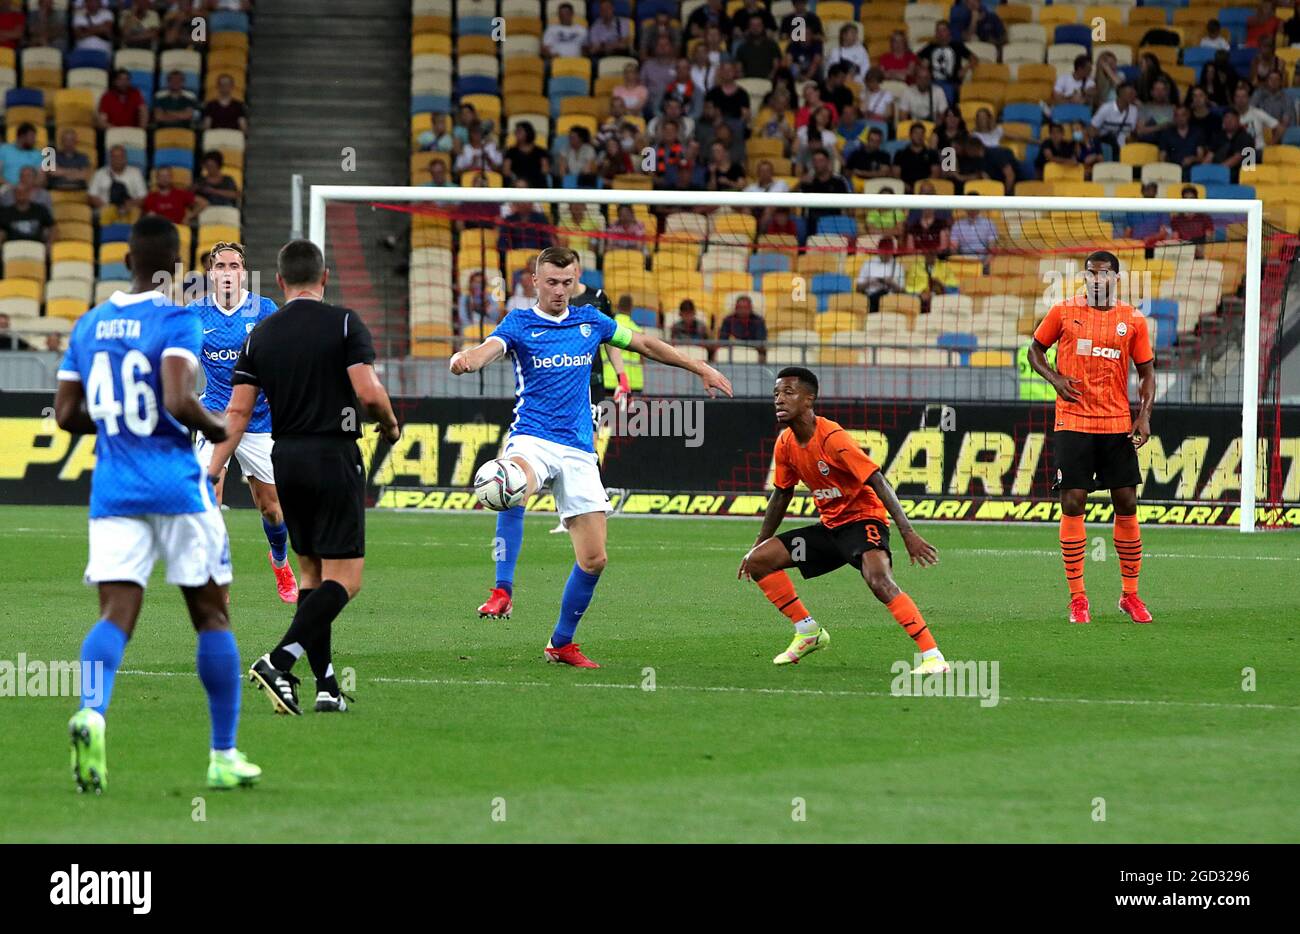 KYIV, UKRAINE - AUGUST 10, 2021 - Players of FC Shakhtar Donetsk (orange kit) and KRC Genk (blue kit) are seen during the 2021-22 UEFA Champions League third qualifying round second leg game at the NSC Olimpiyskiy, Kyiv, capital of Ukraine. Stock Photo